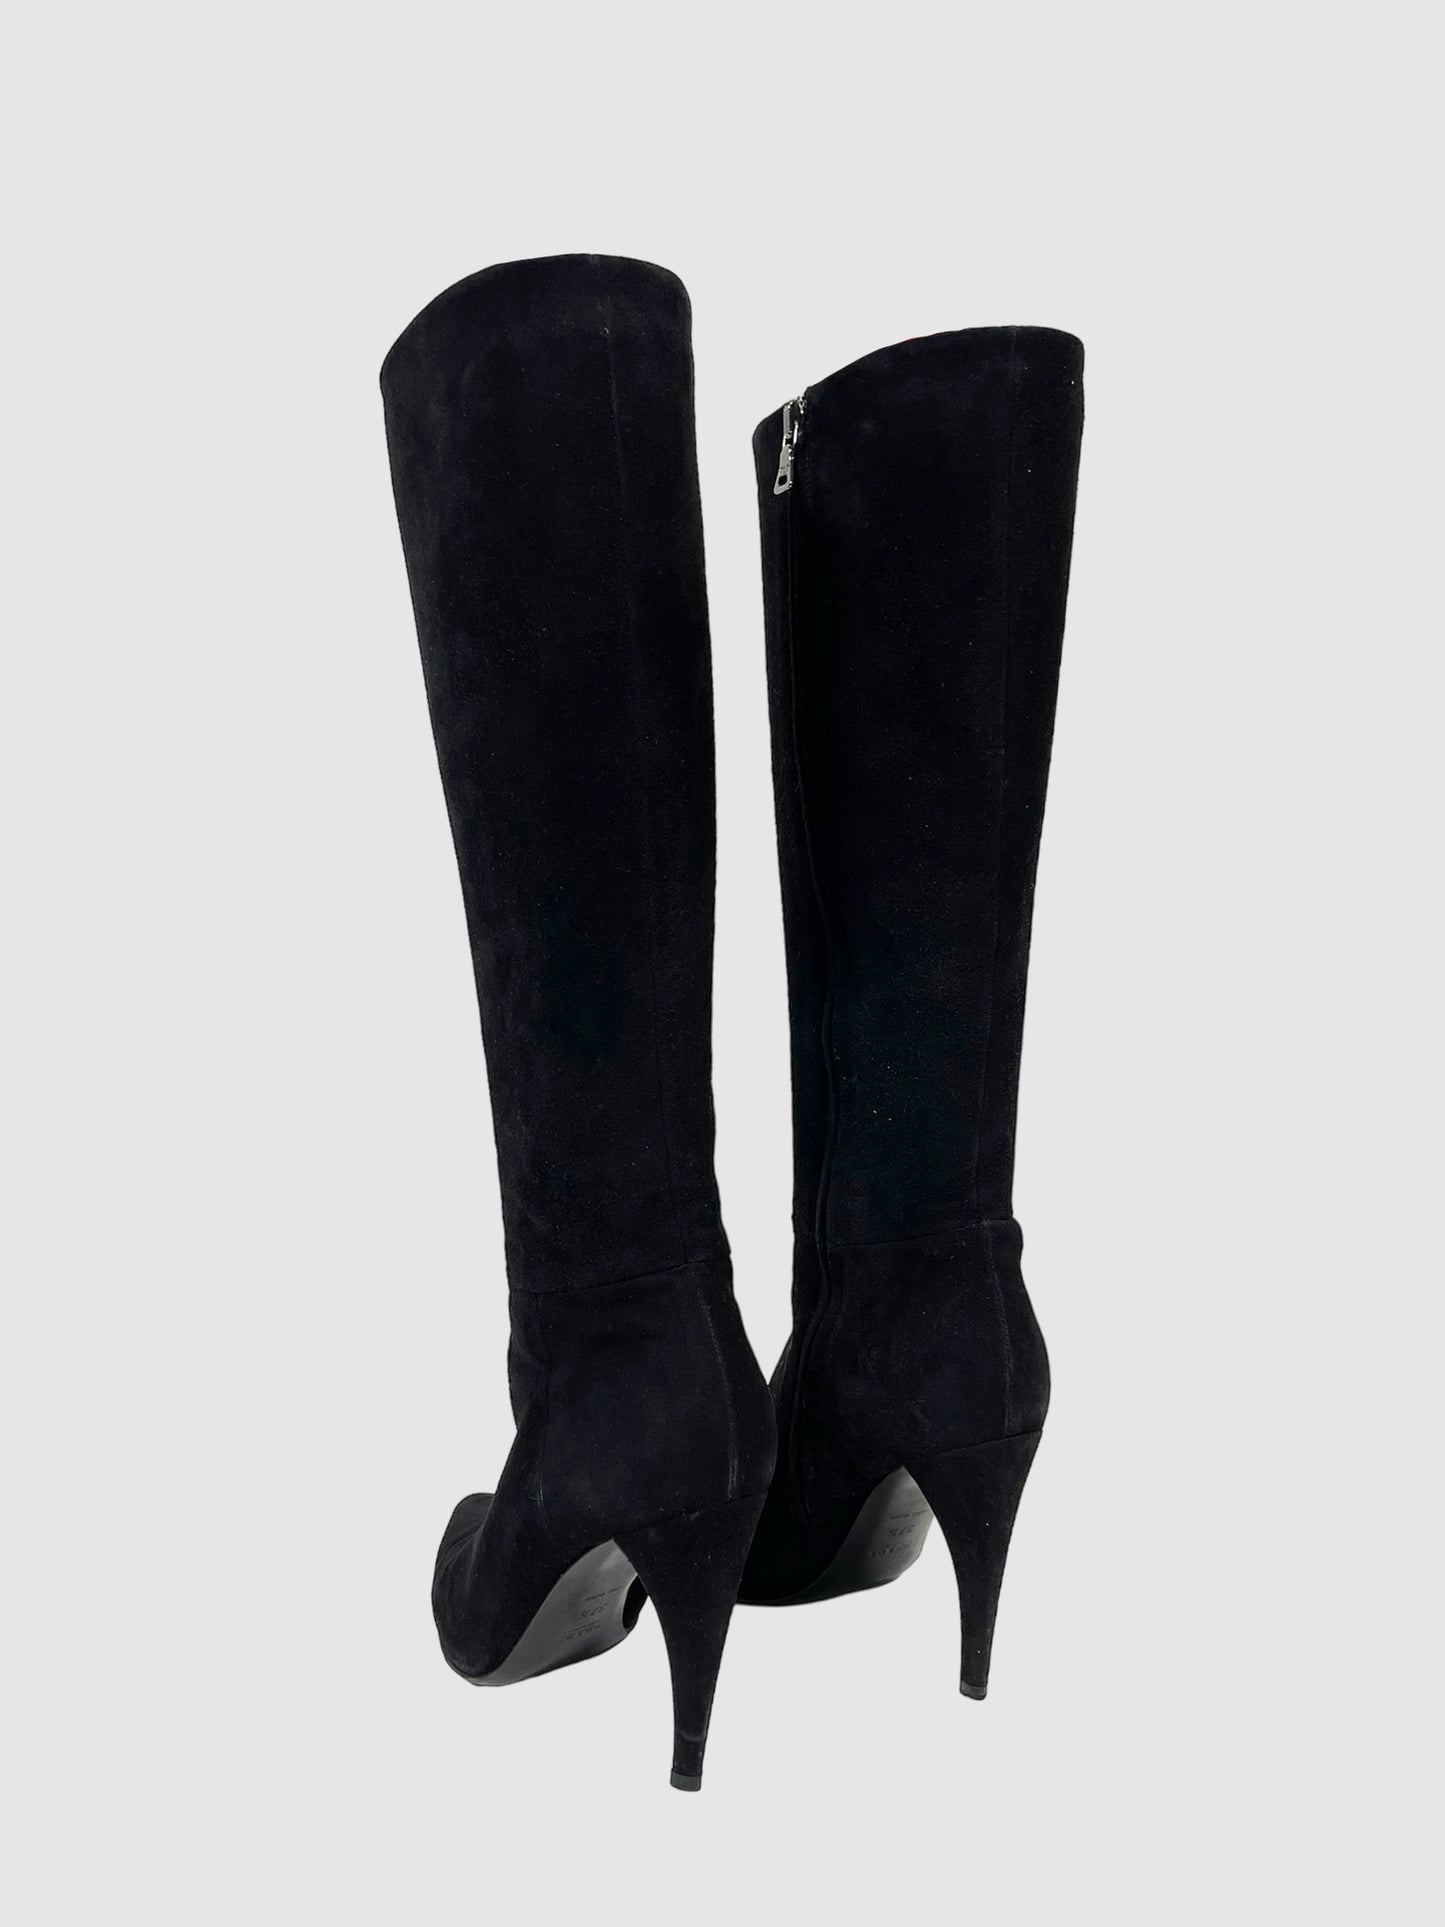 Prada Suede Pointed Toe Boots - Size 37.5